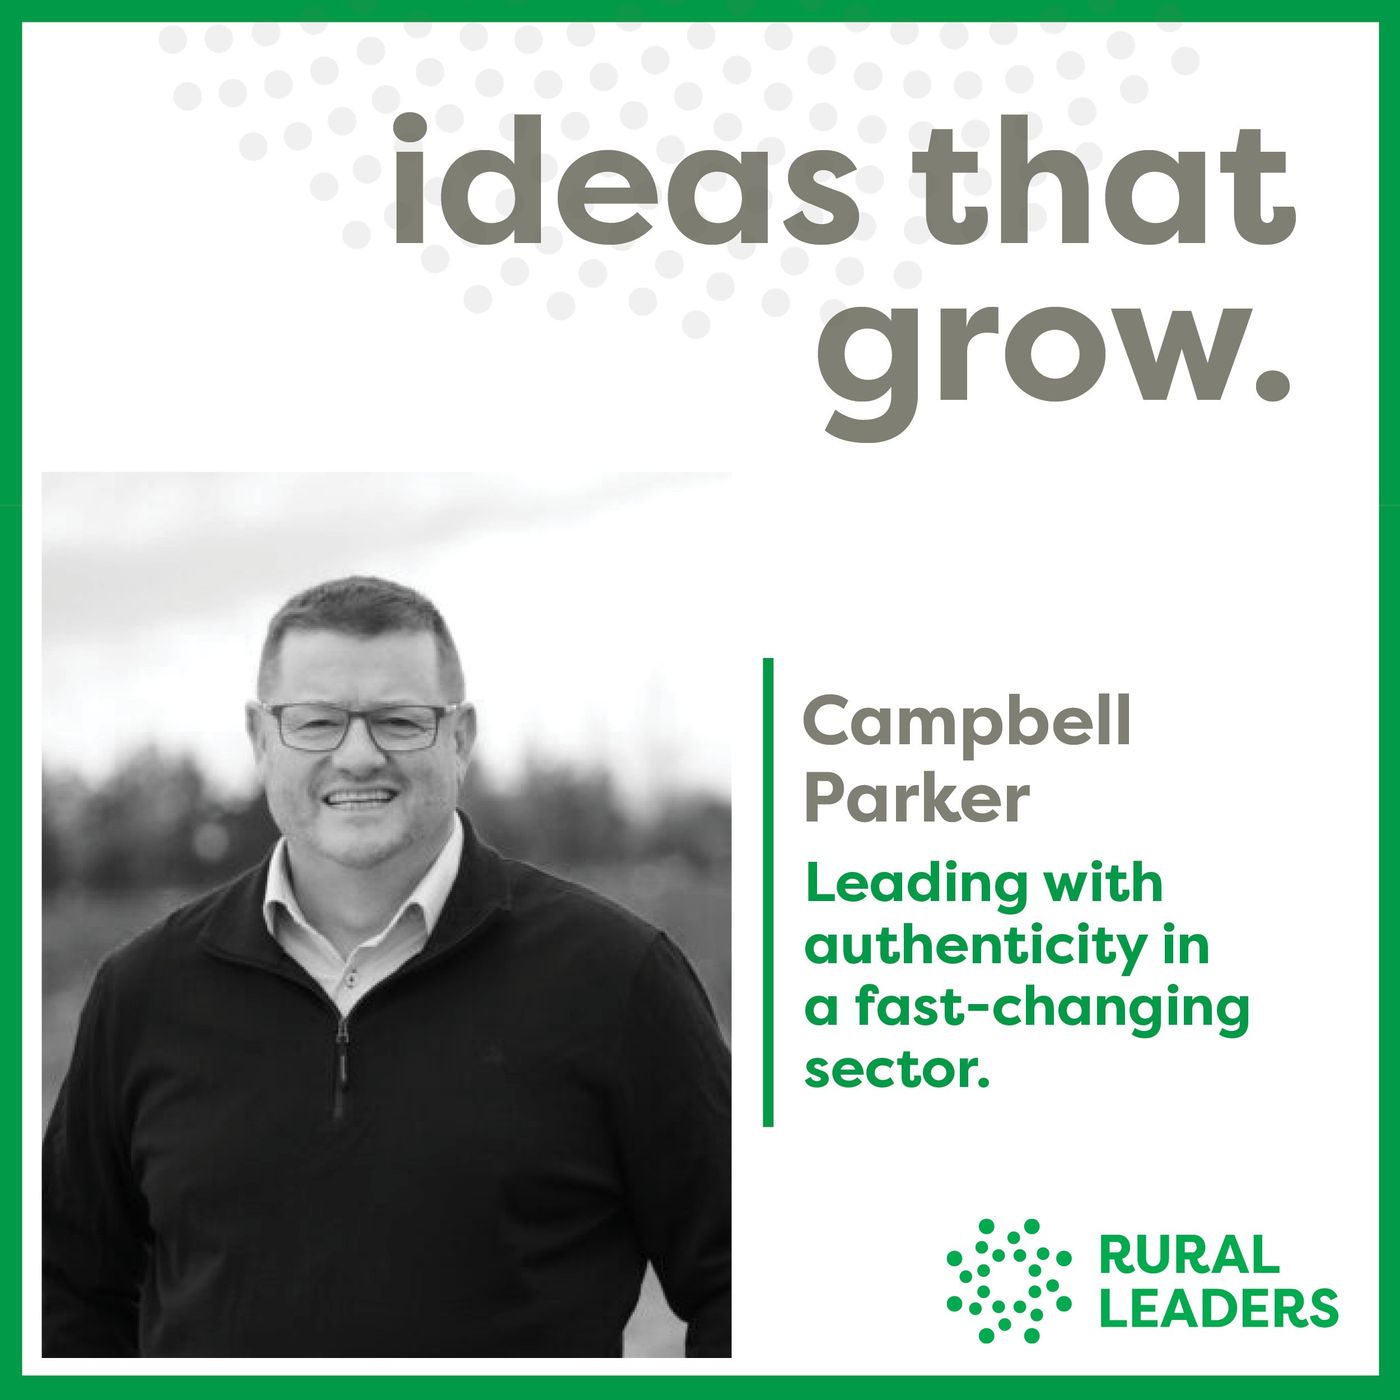 Campbell Parker: Leading with authenticity in a fast-changing sector